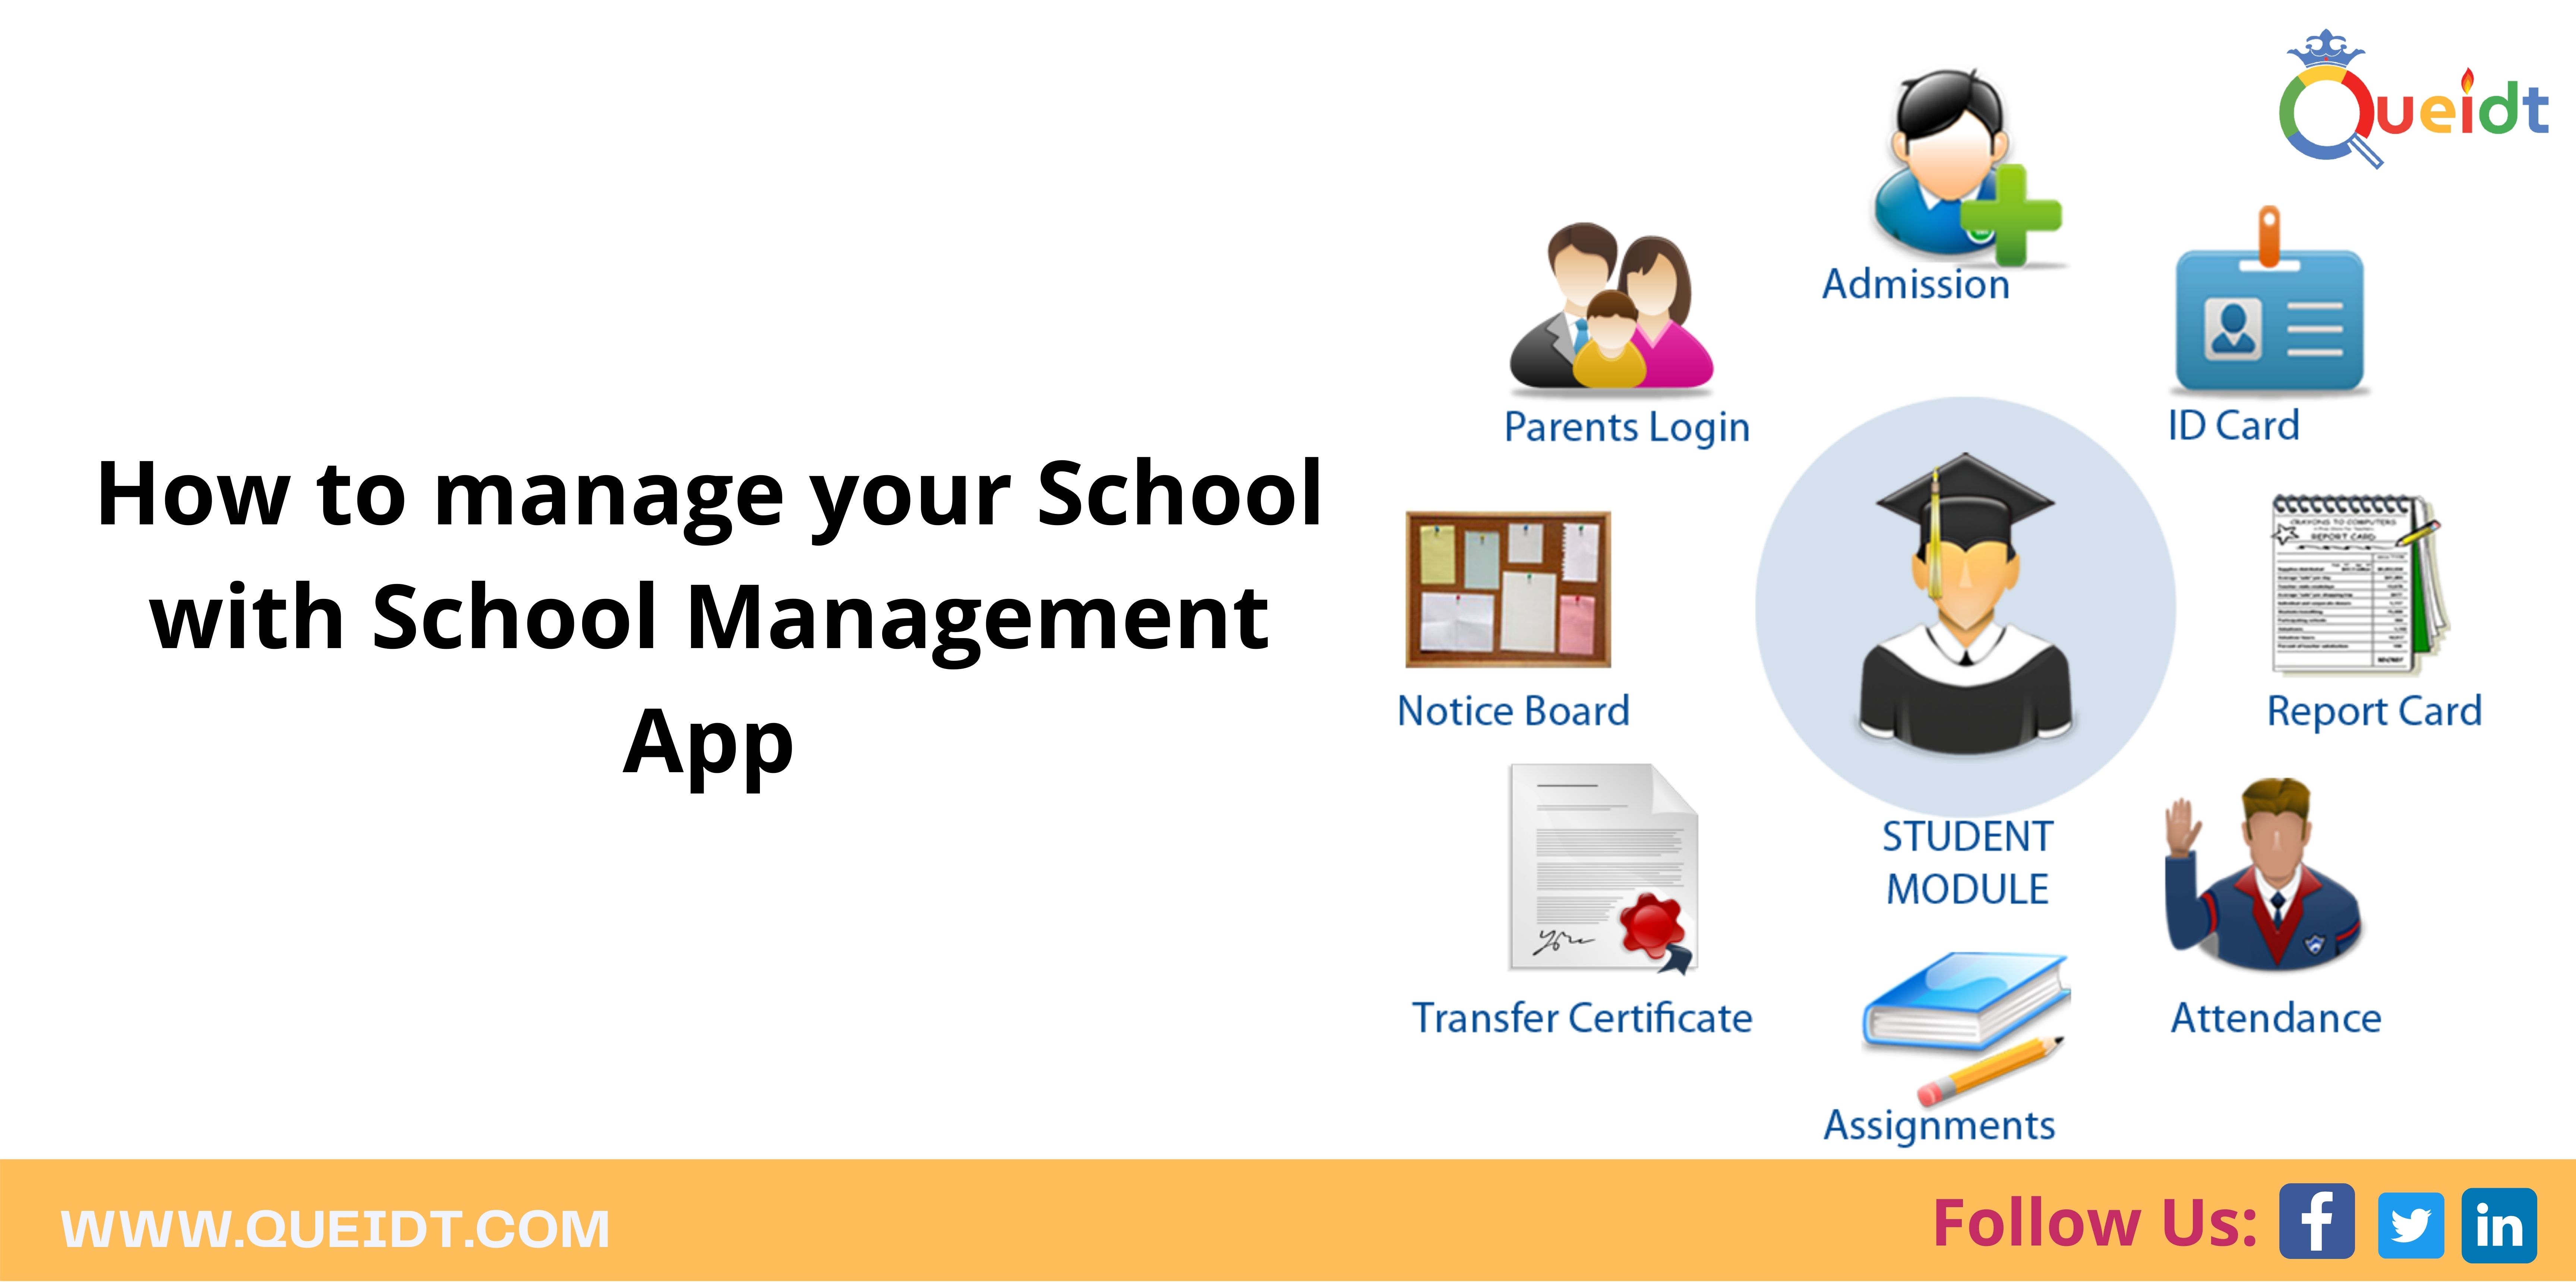 How to manage your School with School Management App